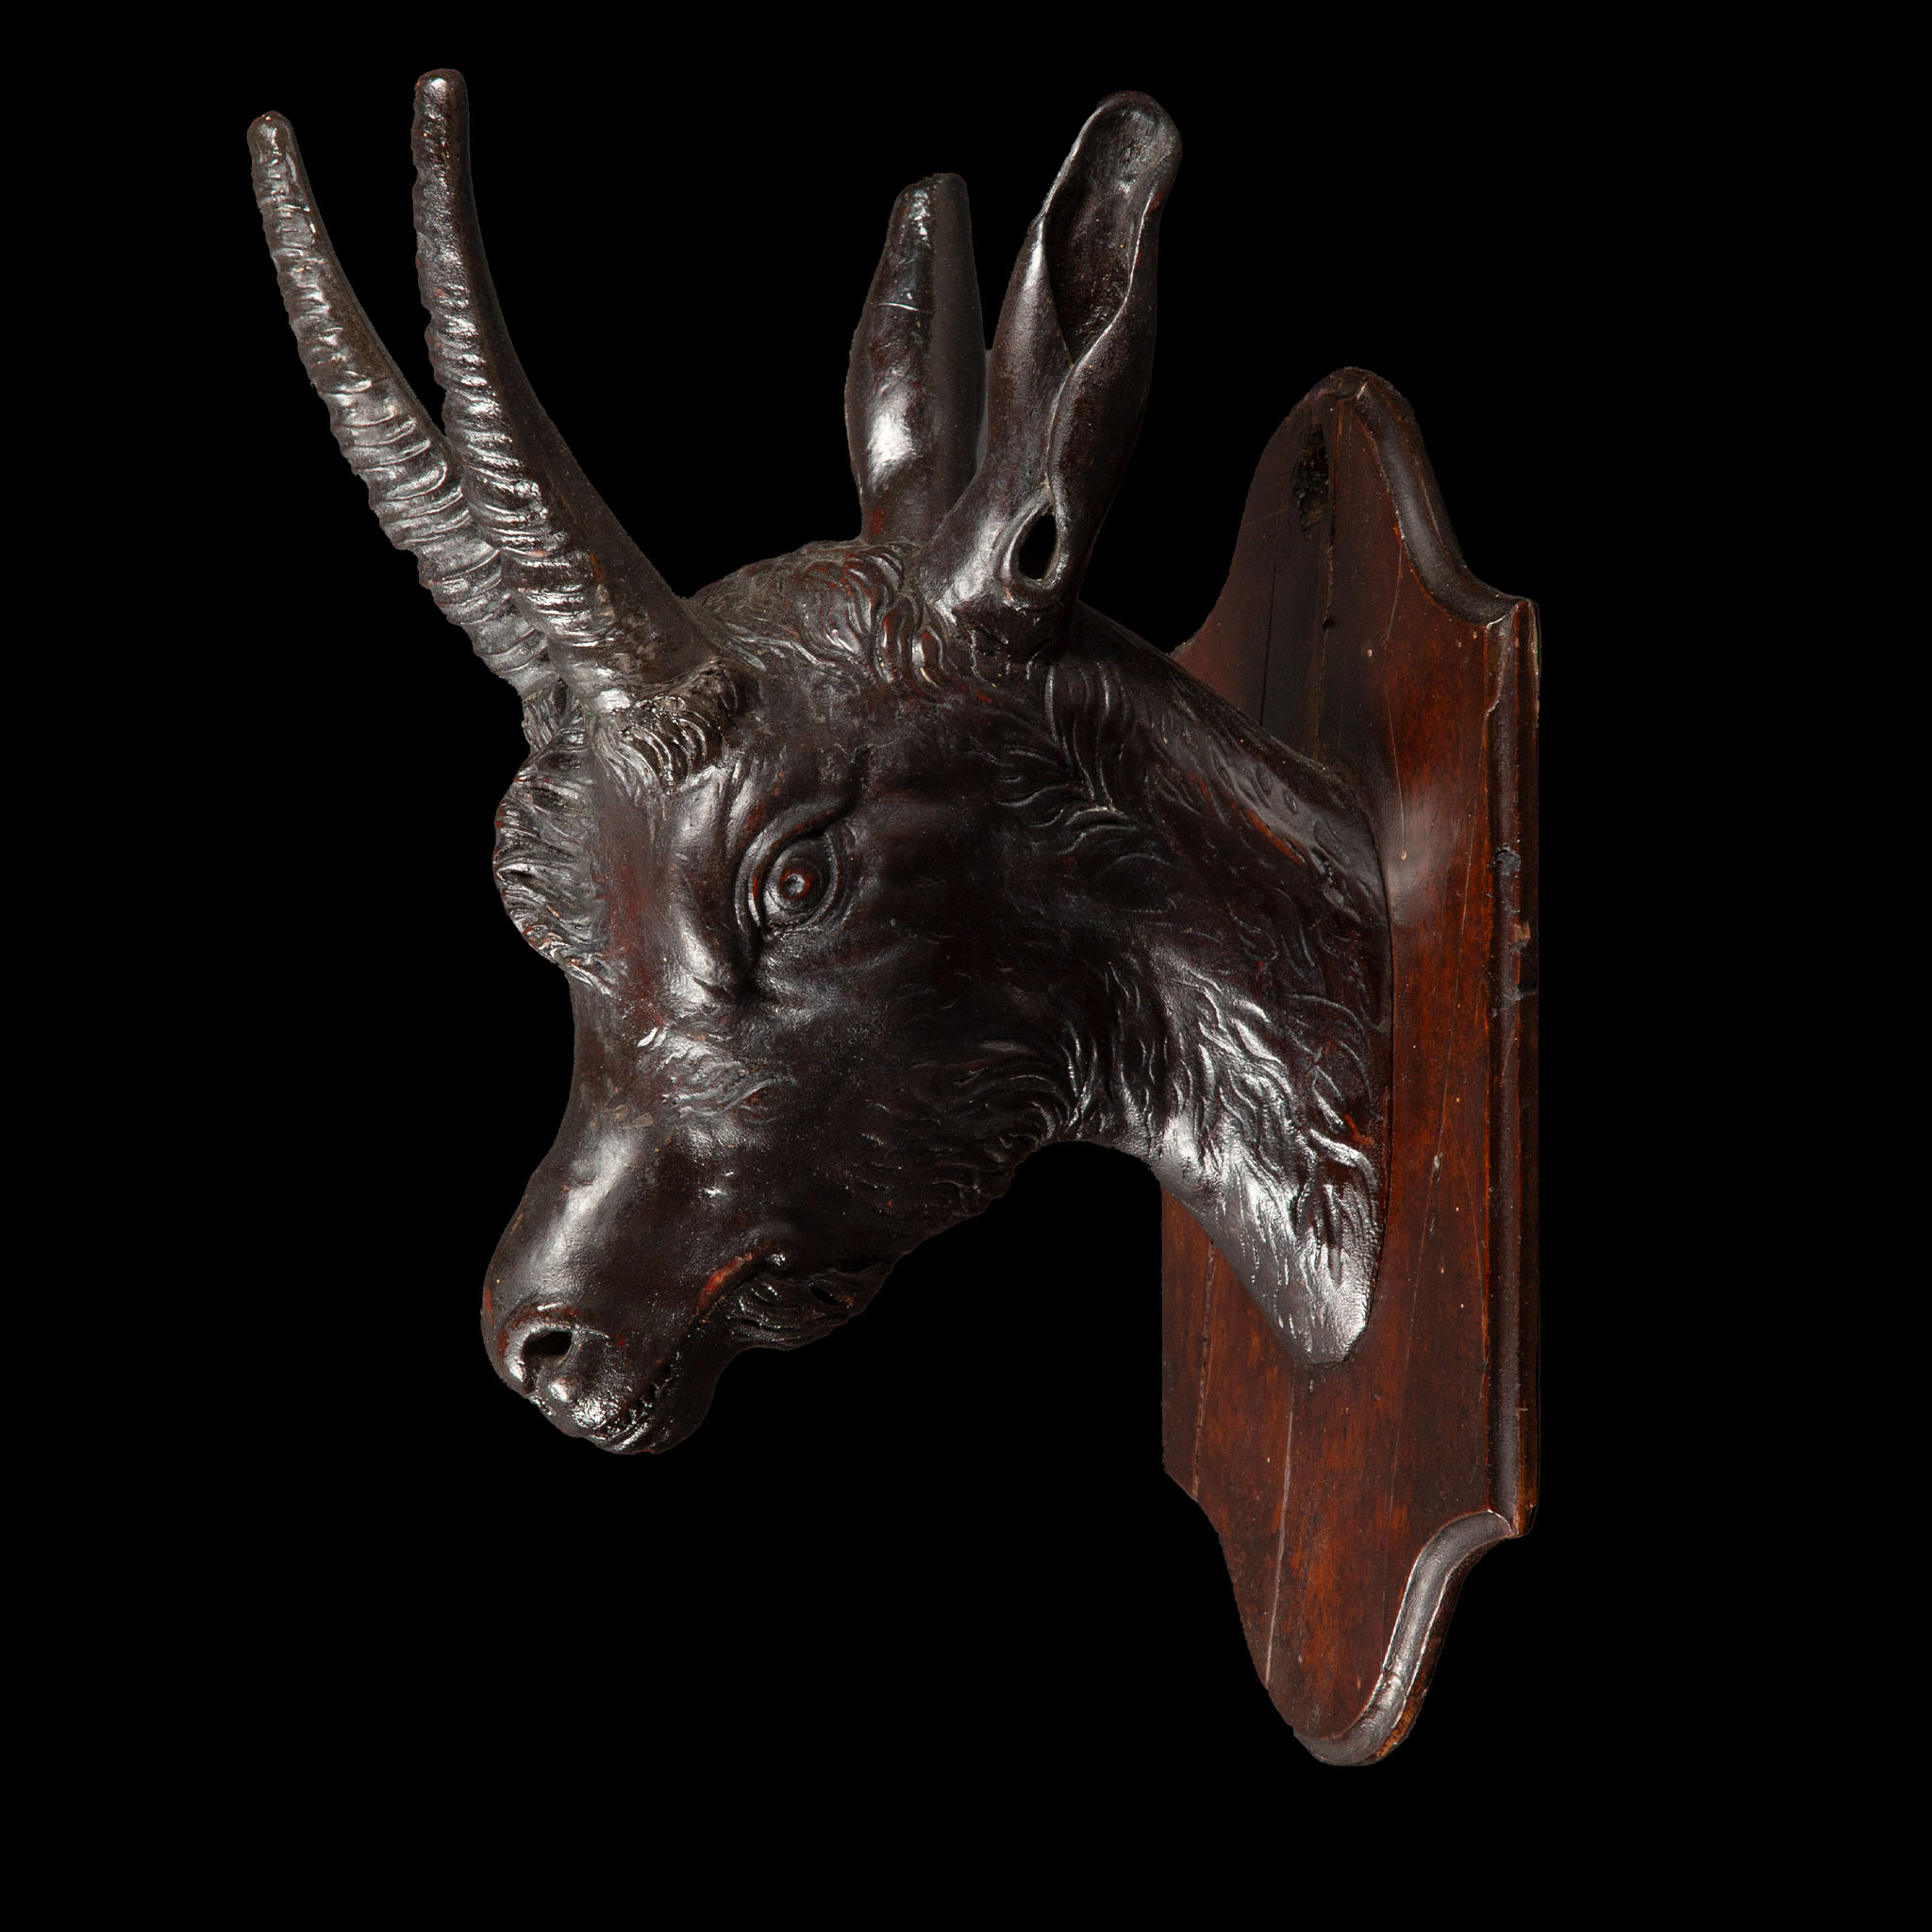 19th C. Black Forest Wall Mounted Carved Wood Goat on a Plaque